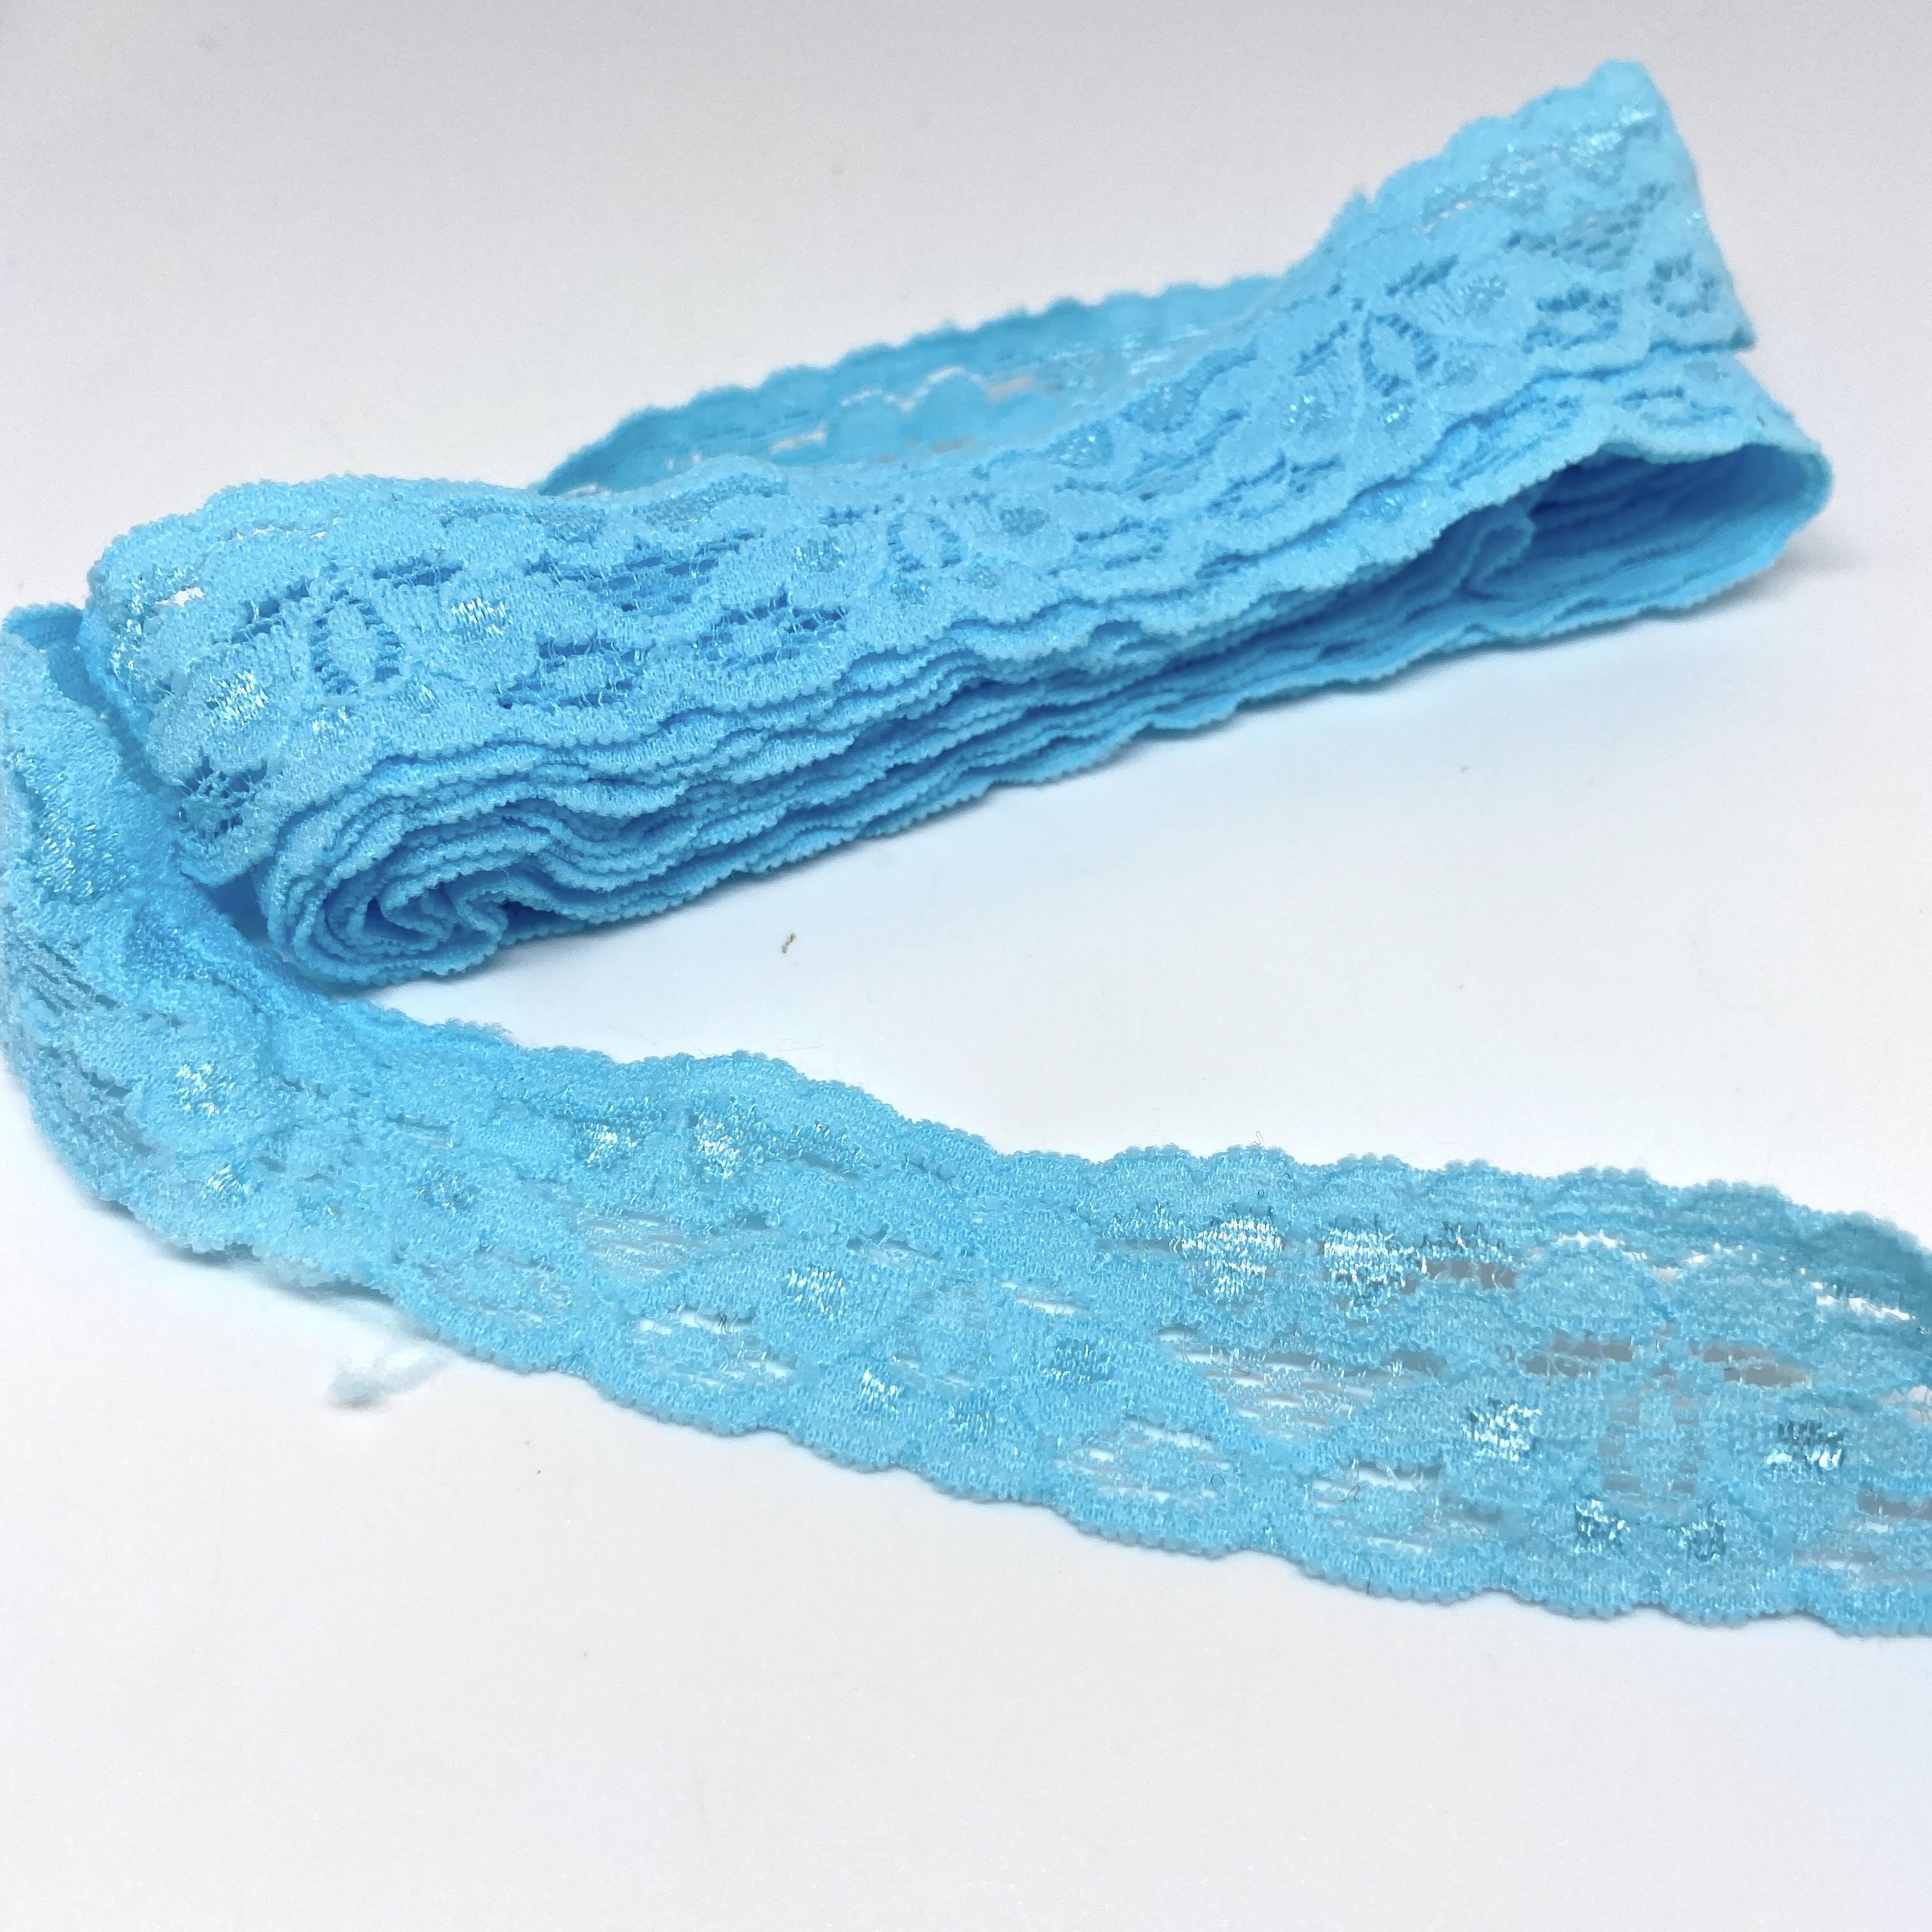 Stretch Lace - Narrow - 25mm wide (1